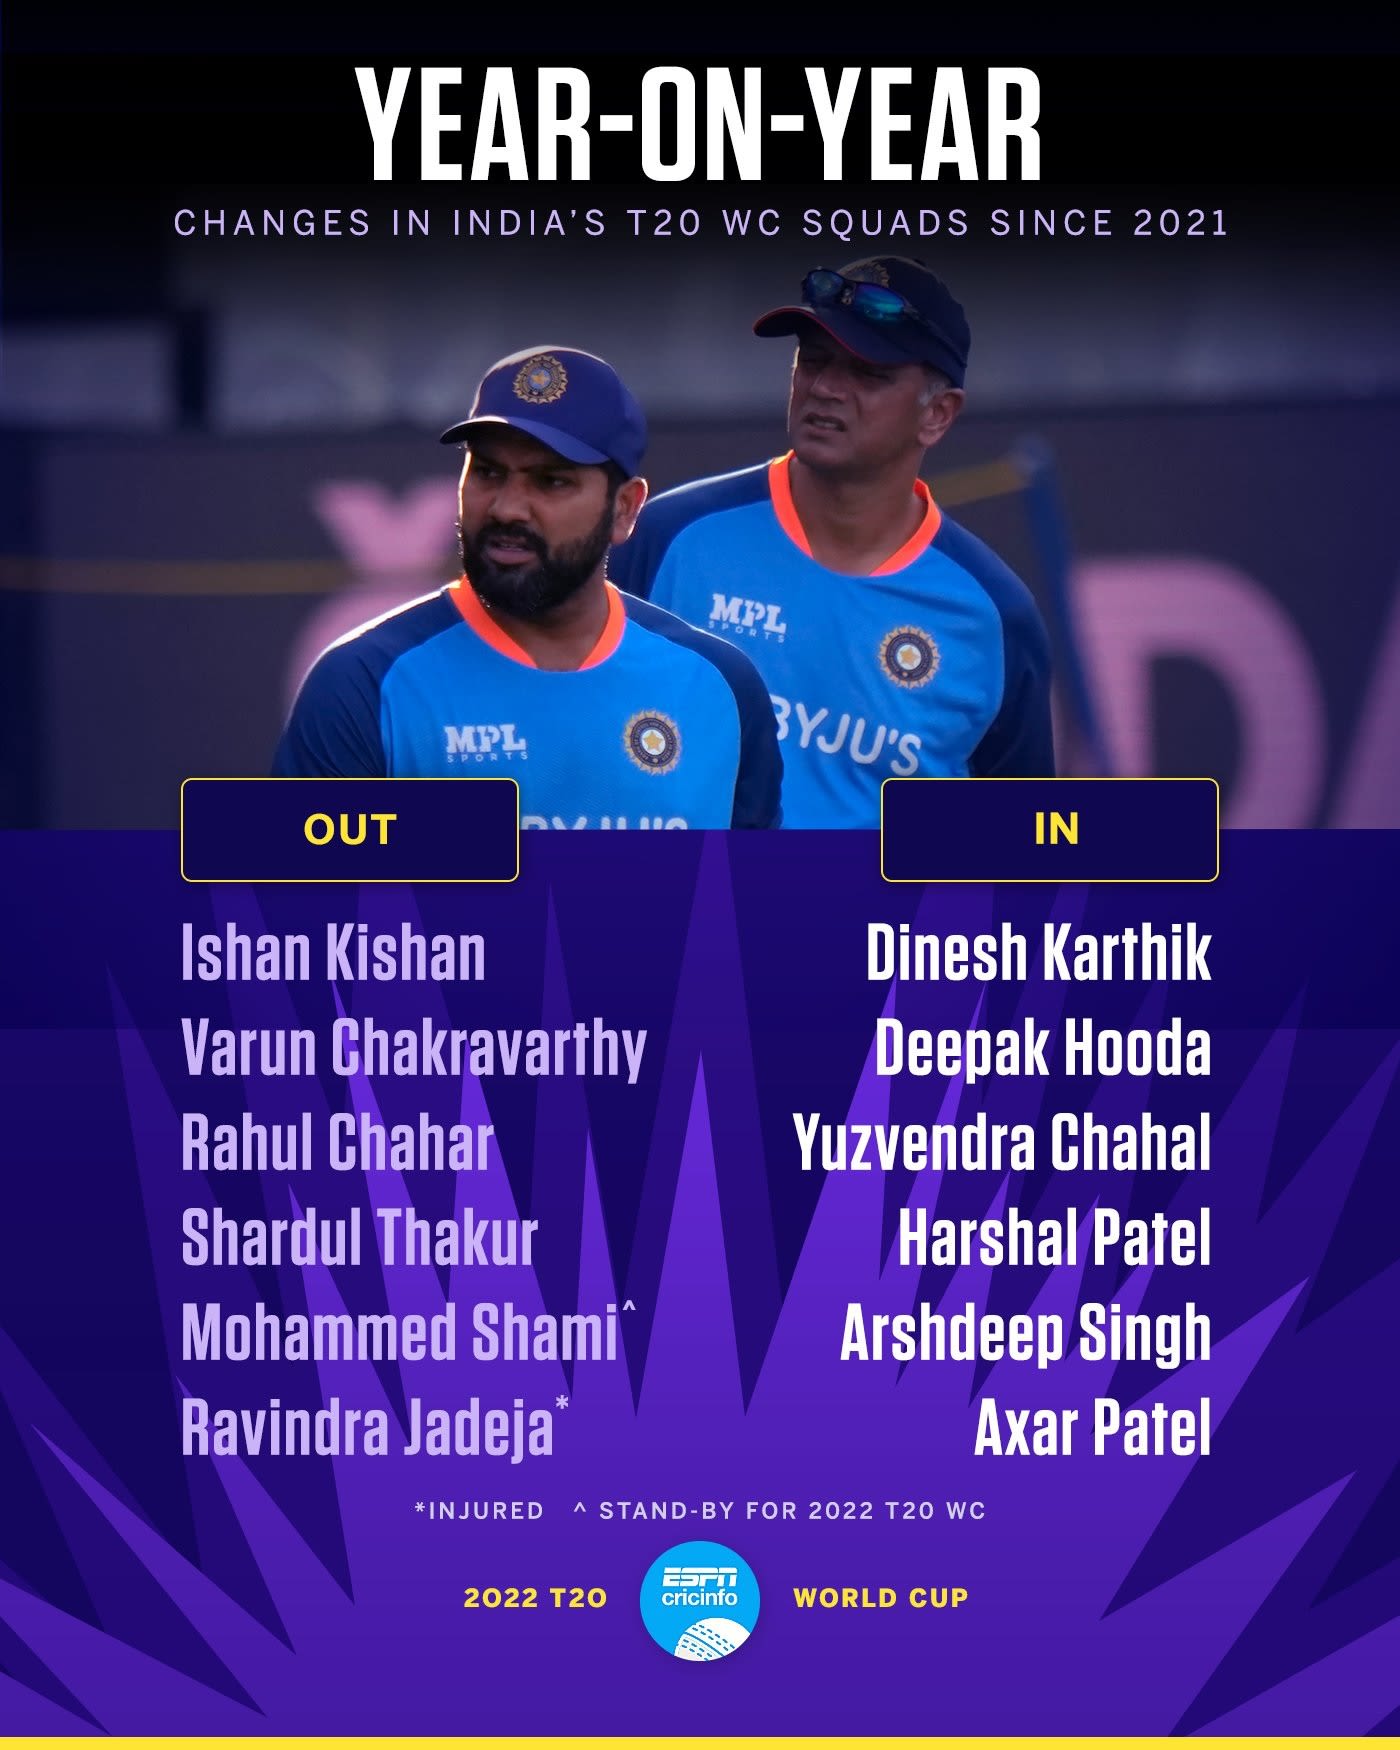 Jasprit Bumrah and Harshal Patel return to India squad for T20 World Cup ESPNcricinfo